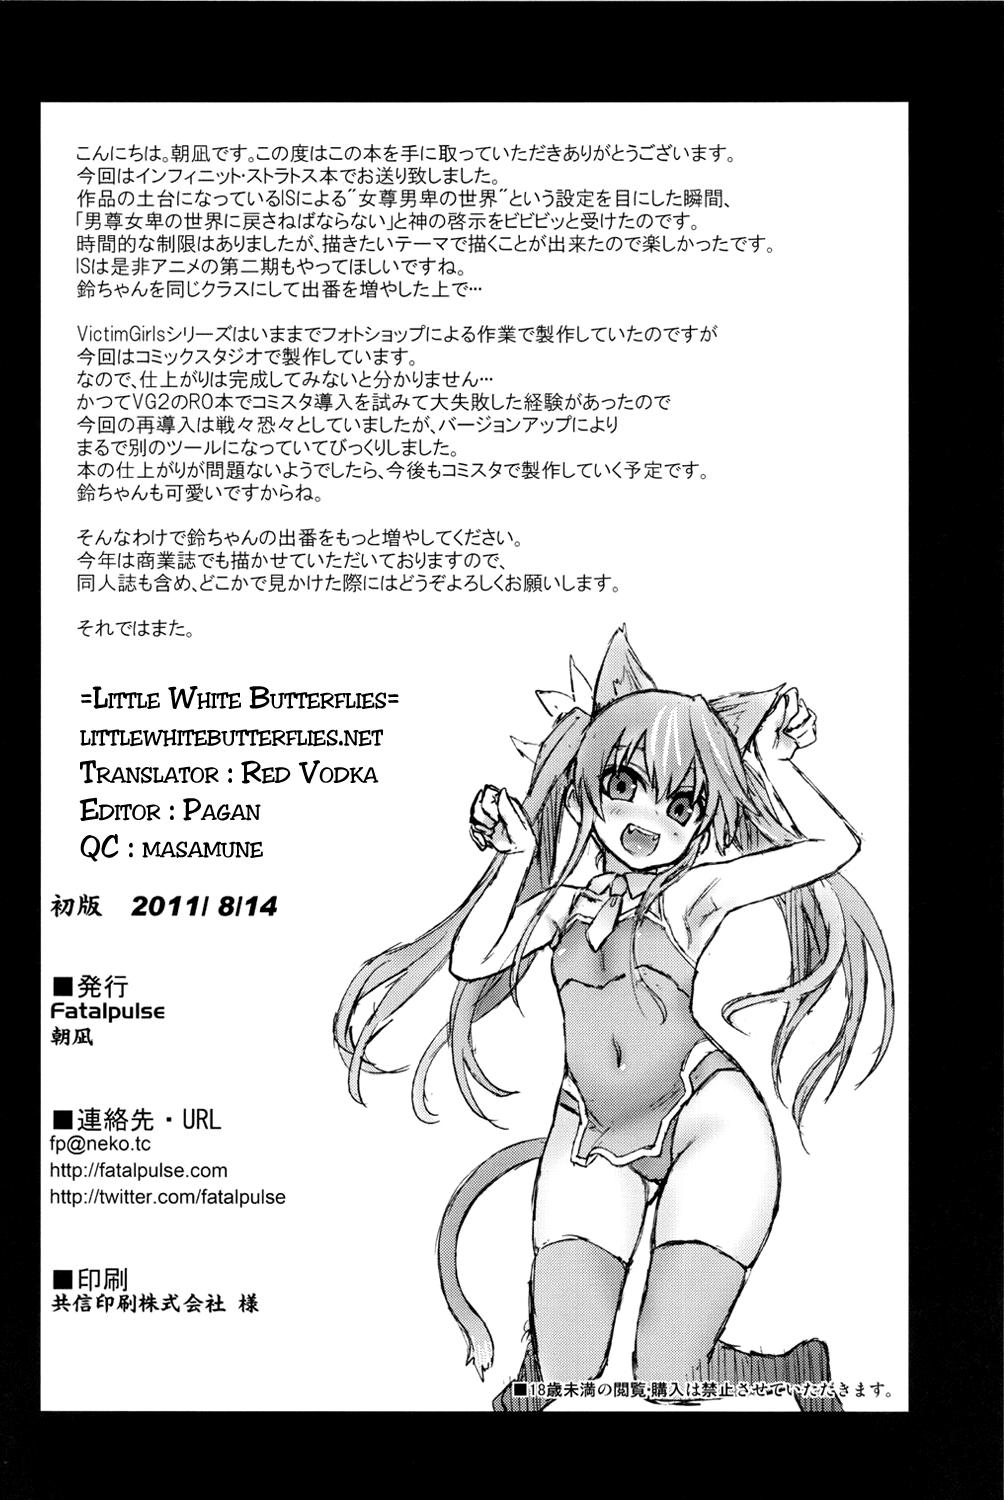 Gayporn Victim Girls 11 TEARY RED EYES - Infinite stratos Rough Porn - Page 29